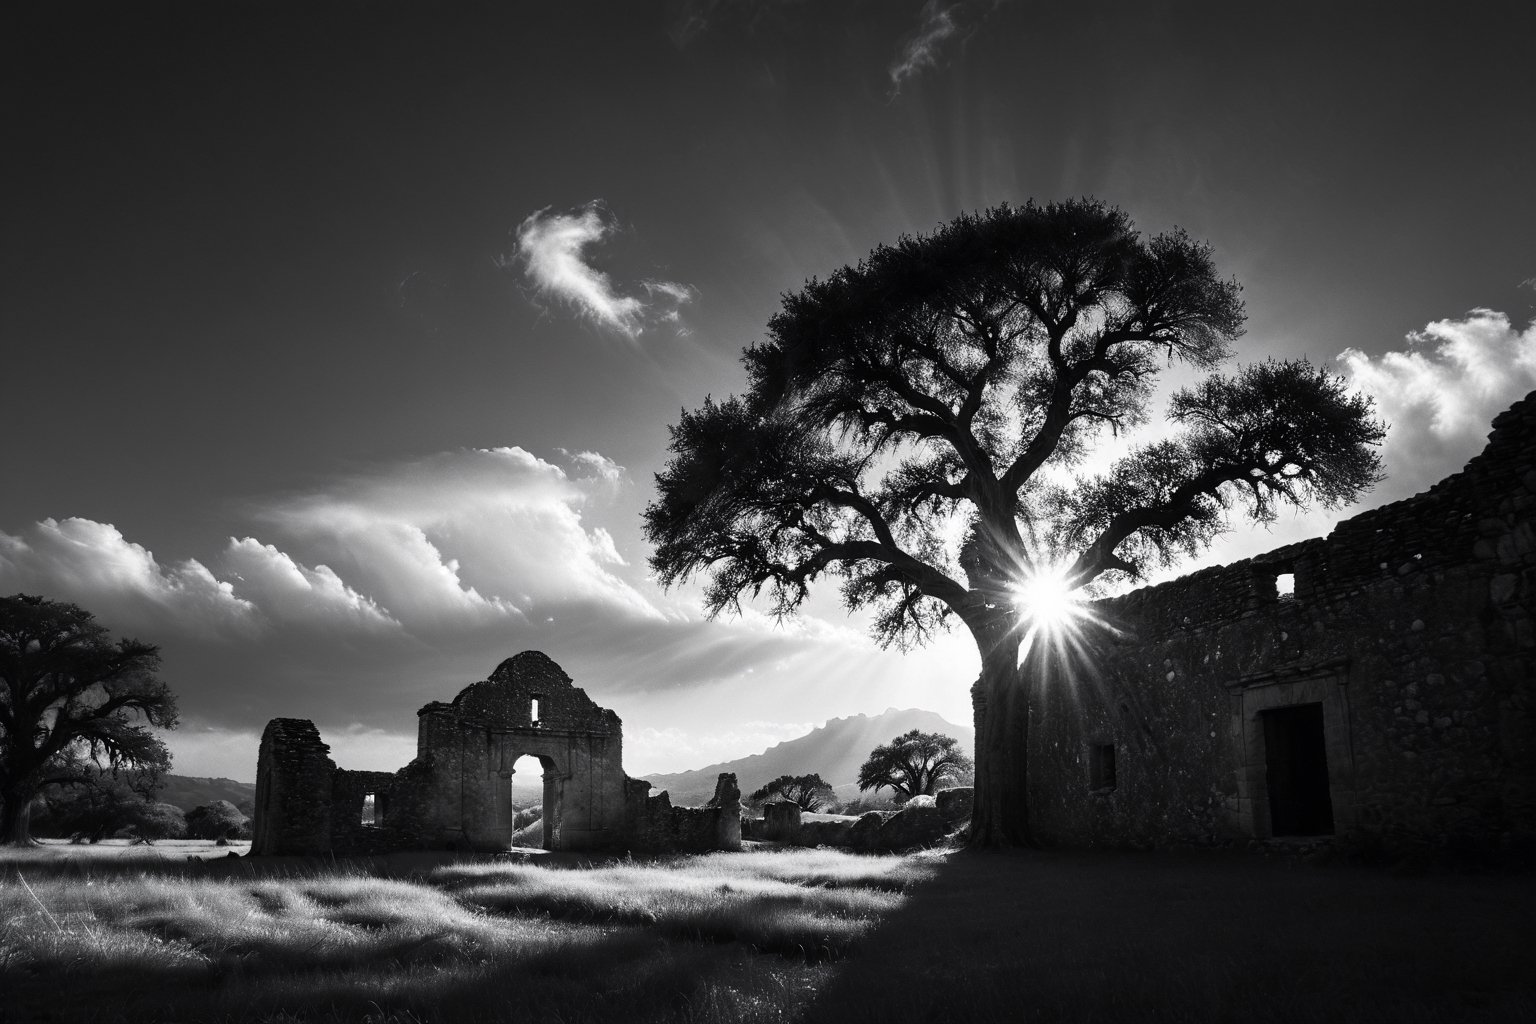 black and white realistic photo, texas hill country,   very large rustic stone built spanish mission san jose ruins in the background, detail and vibrant, barroque style, 8k, sunrise,3D, Masterpiece, black and white, infrared exposure, two thirds rule of photography, adam ansel style, cumulus clouds, hills and live oak tree, medium perspective, sunlight rays shining through oak tree, mysterious, SD1.5, offset focus, perspective at 33 degrees, realistic oak trees and leaves, feng shui style, image subject are balanced